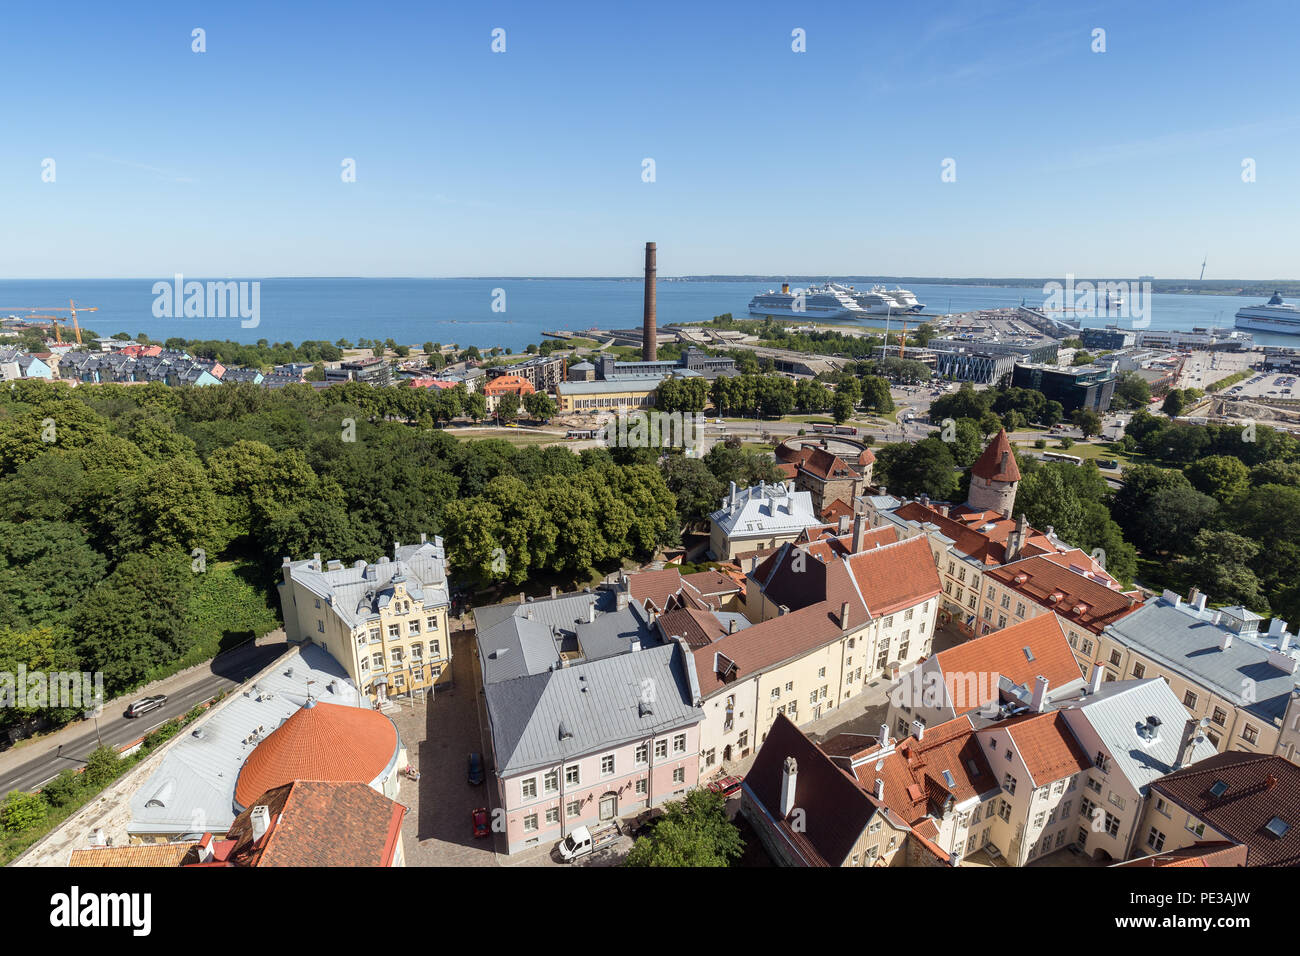 Old buildings at the Old Town, harbor and downtown in Tallinn, Estonia, viewed from above on a sunny day in the summer. Stock Photo